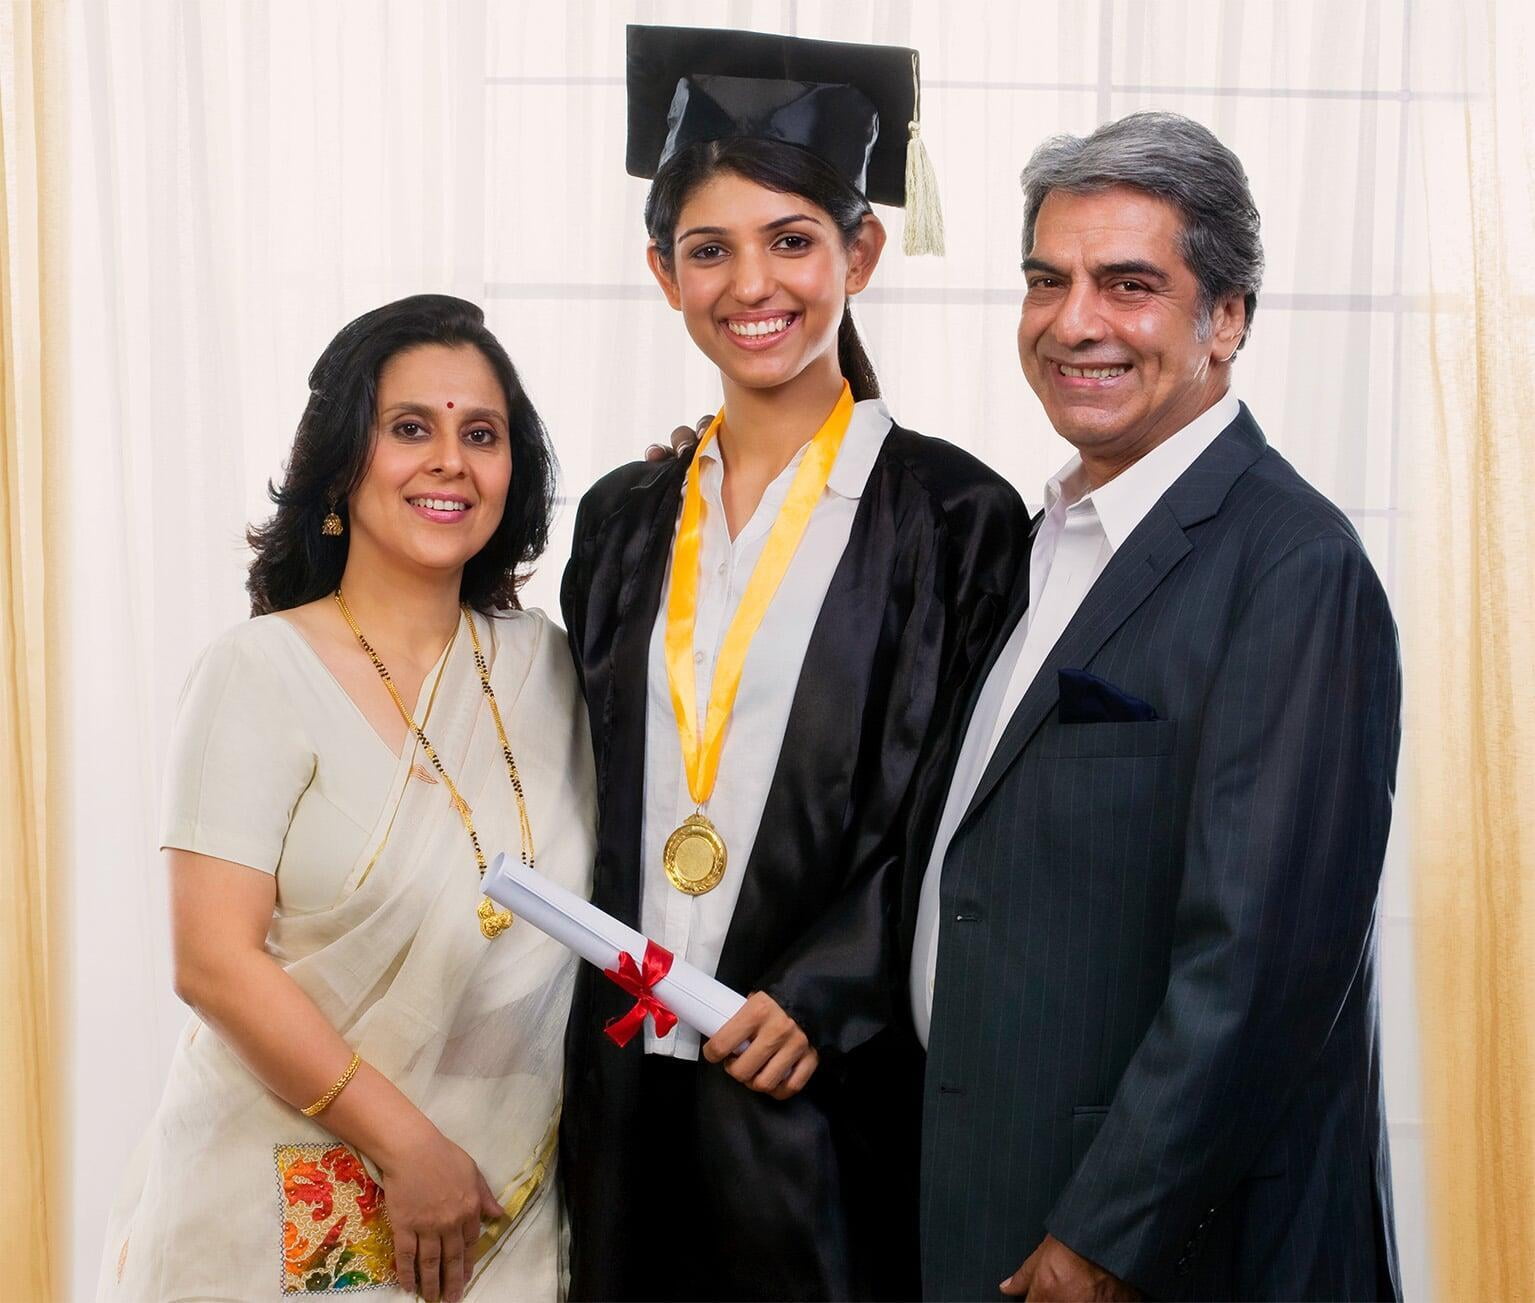 Graduate girl posing with her parents